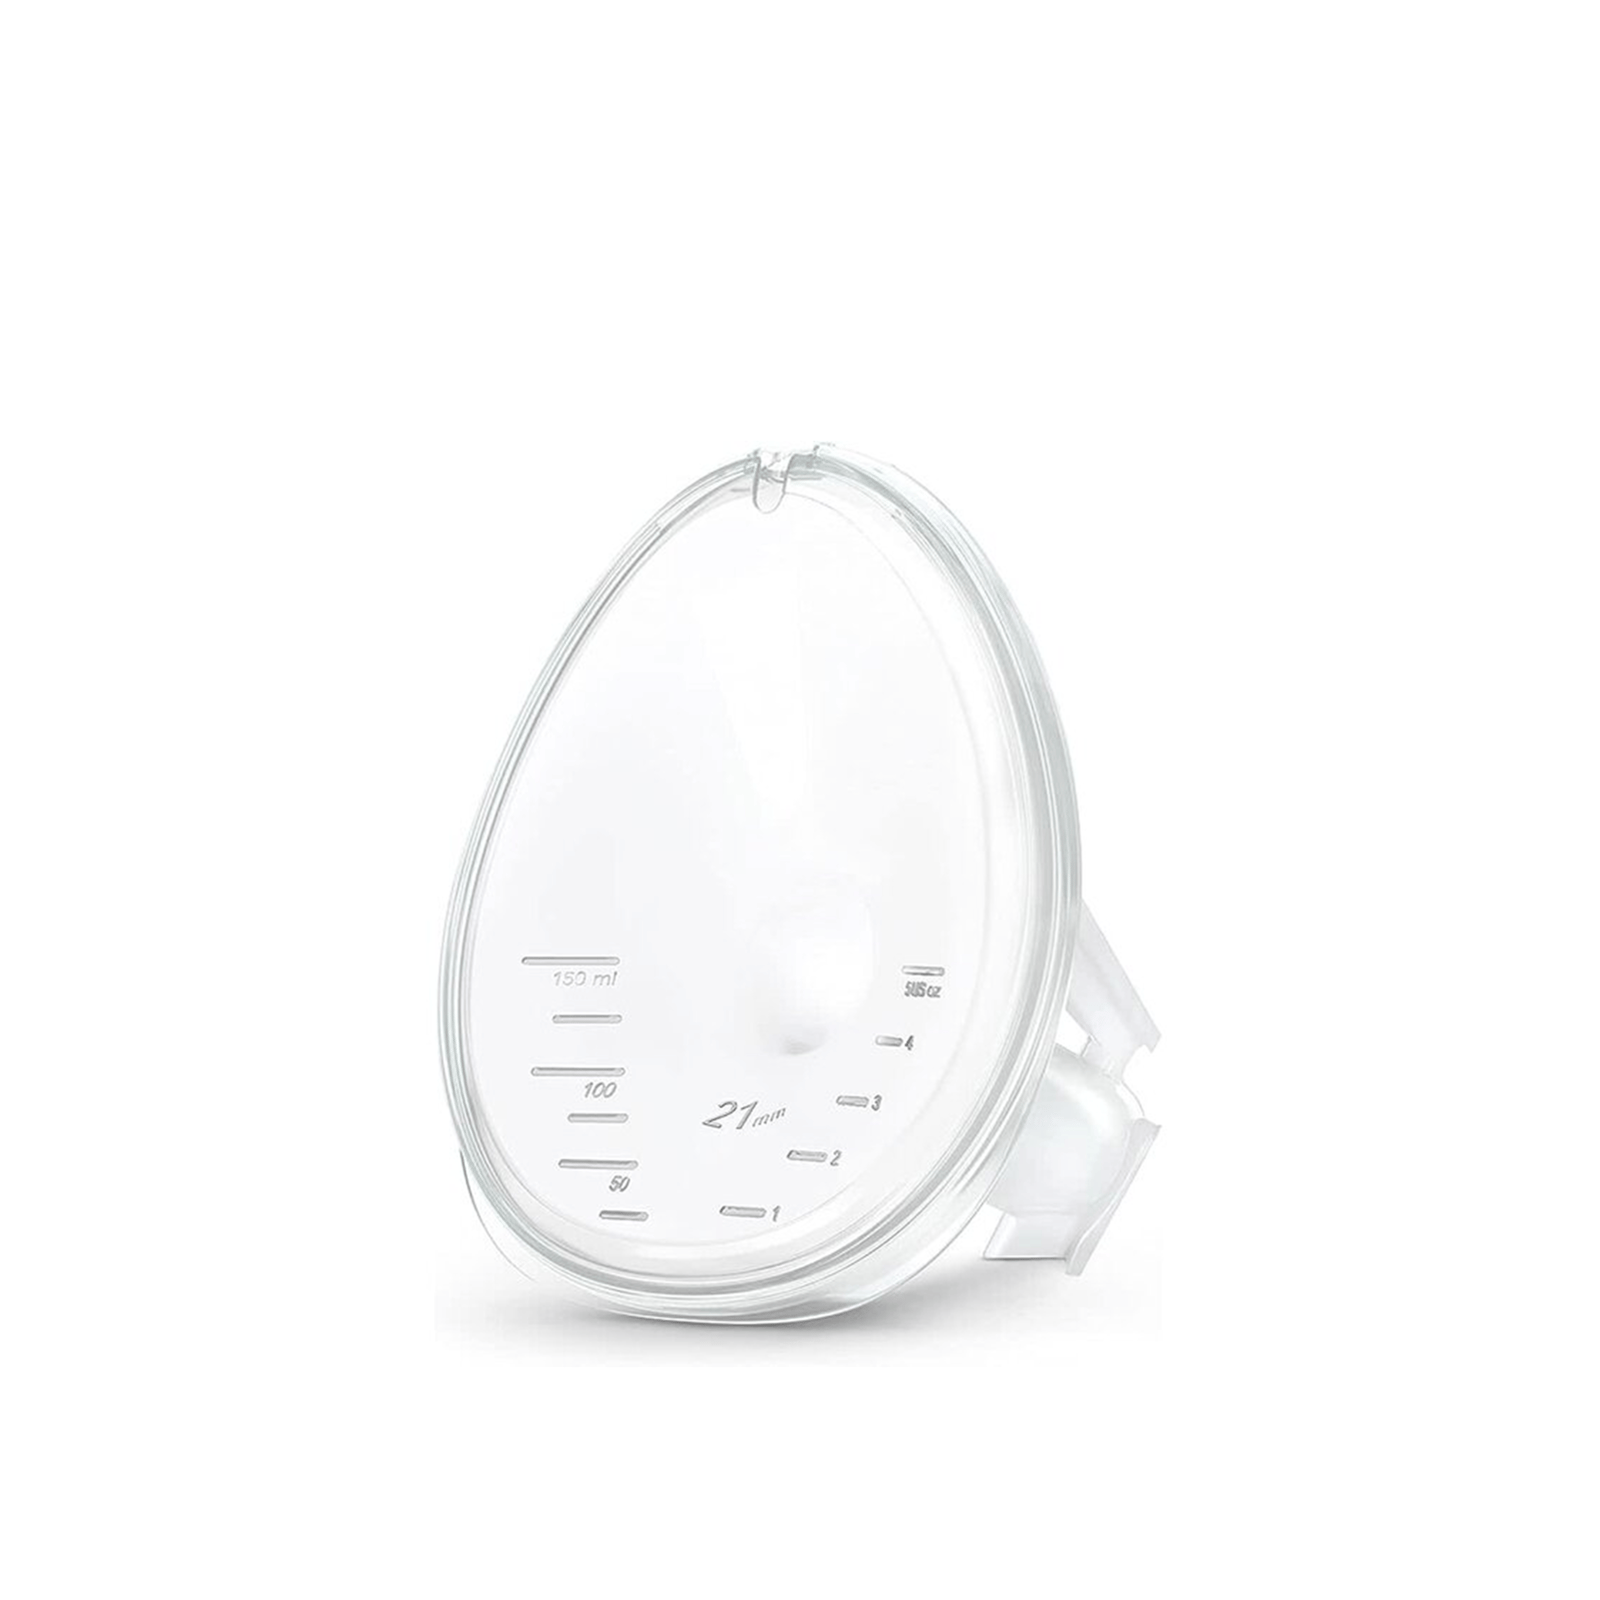 https://static.beautytocare.com/cdn-cgi/image/width=1600,height=1600,f=auto/media/catalog/product//m/e/medela-hands-free-breast-shields-small-size-x2.png